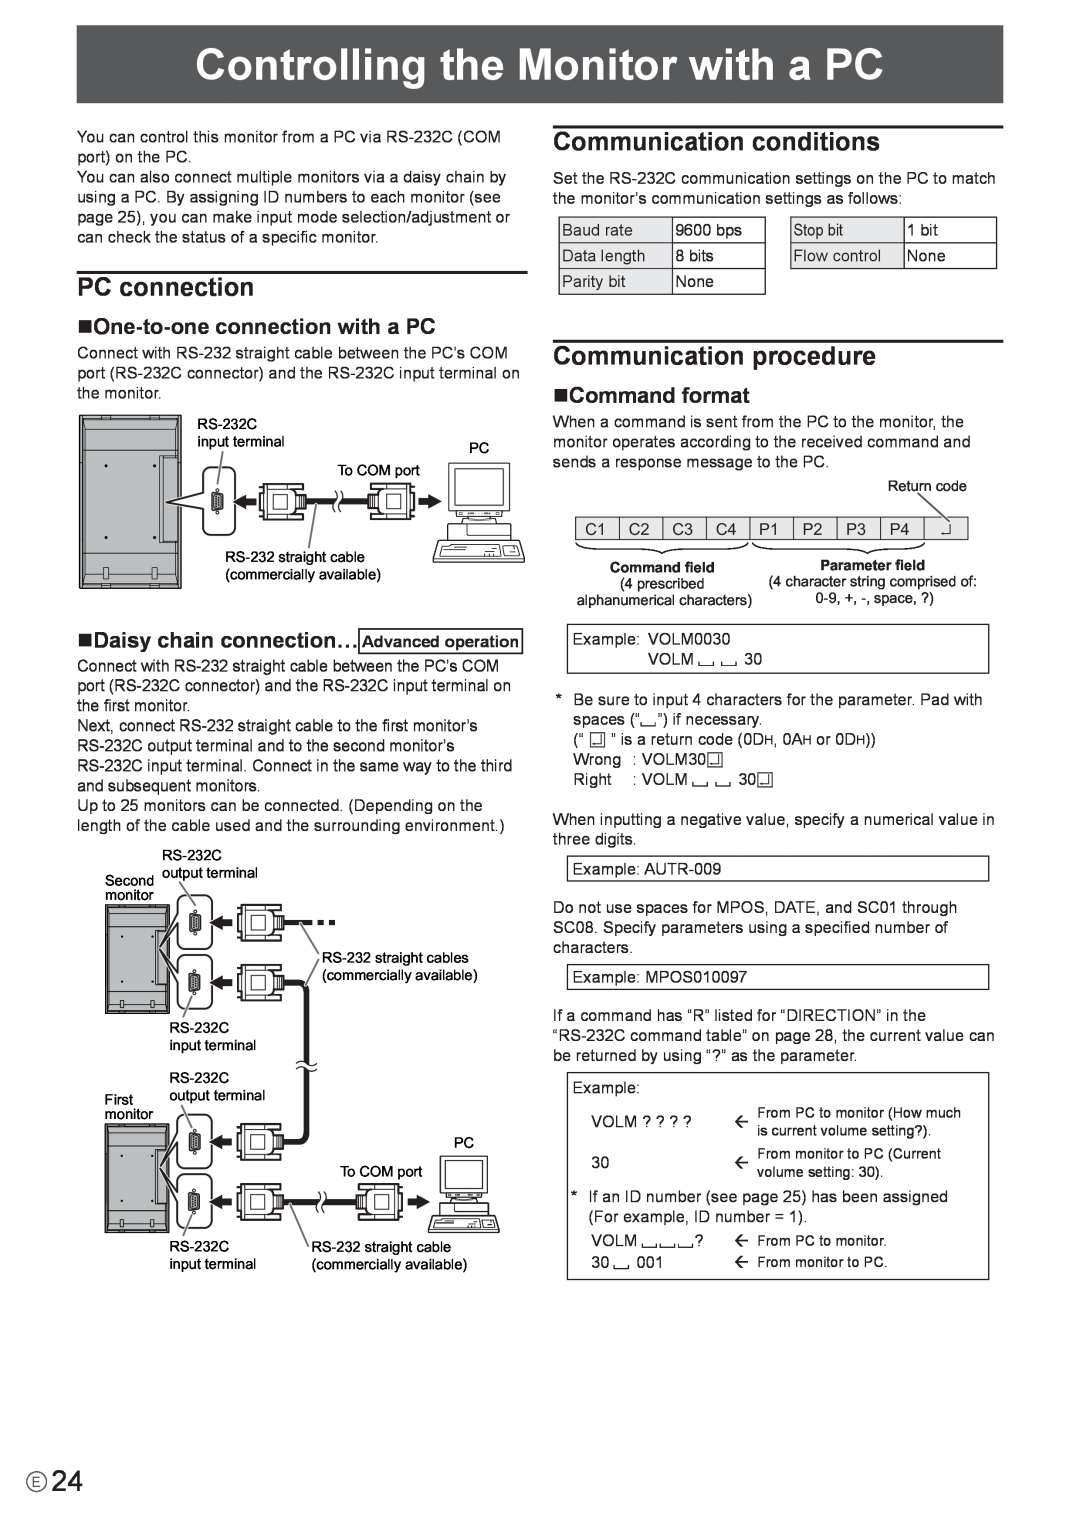 Mitsubishi Electronics LDT651P Controlling the Monitor with a PC, PC connection, Communication conditions, nCommand format 